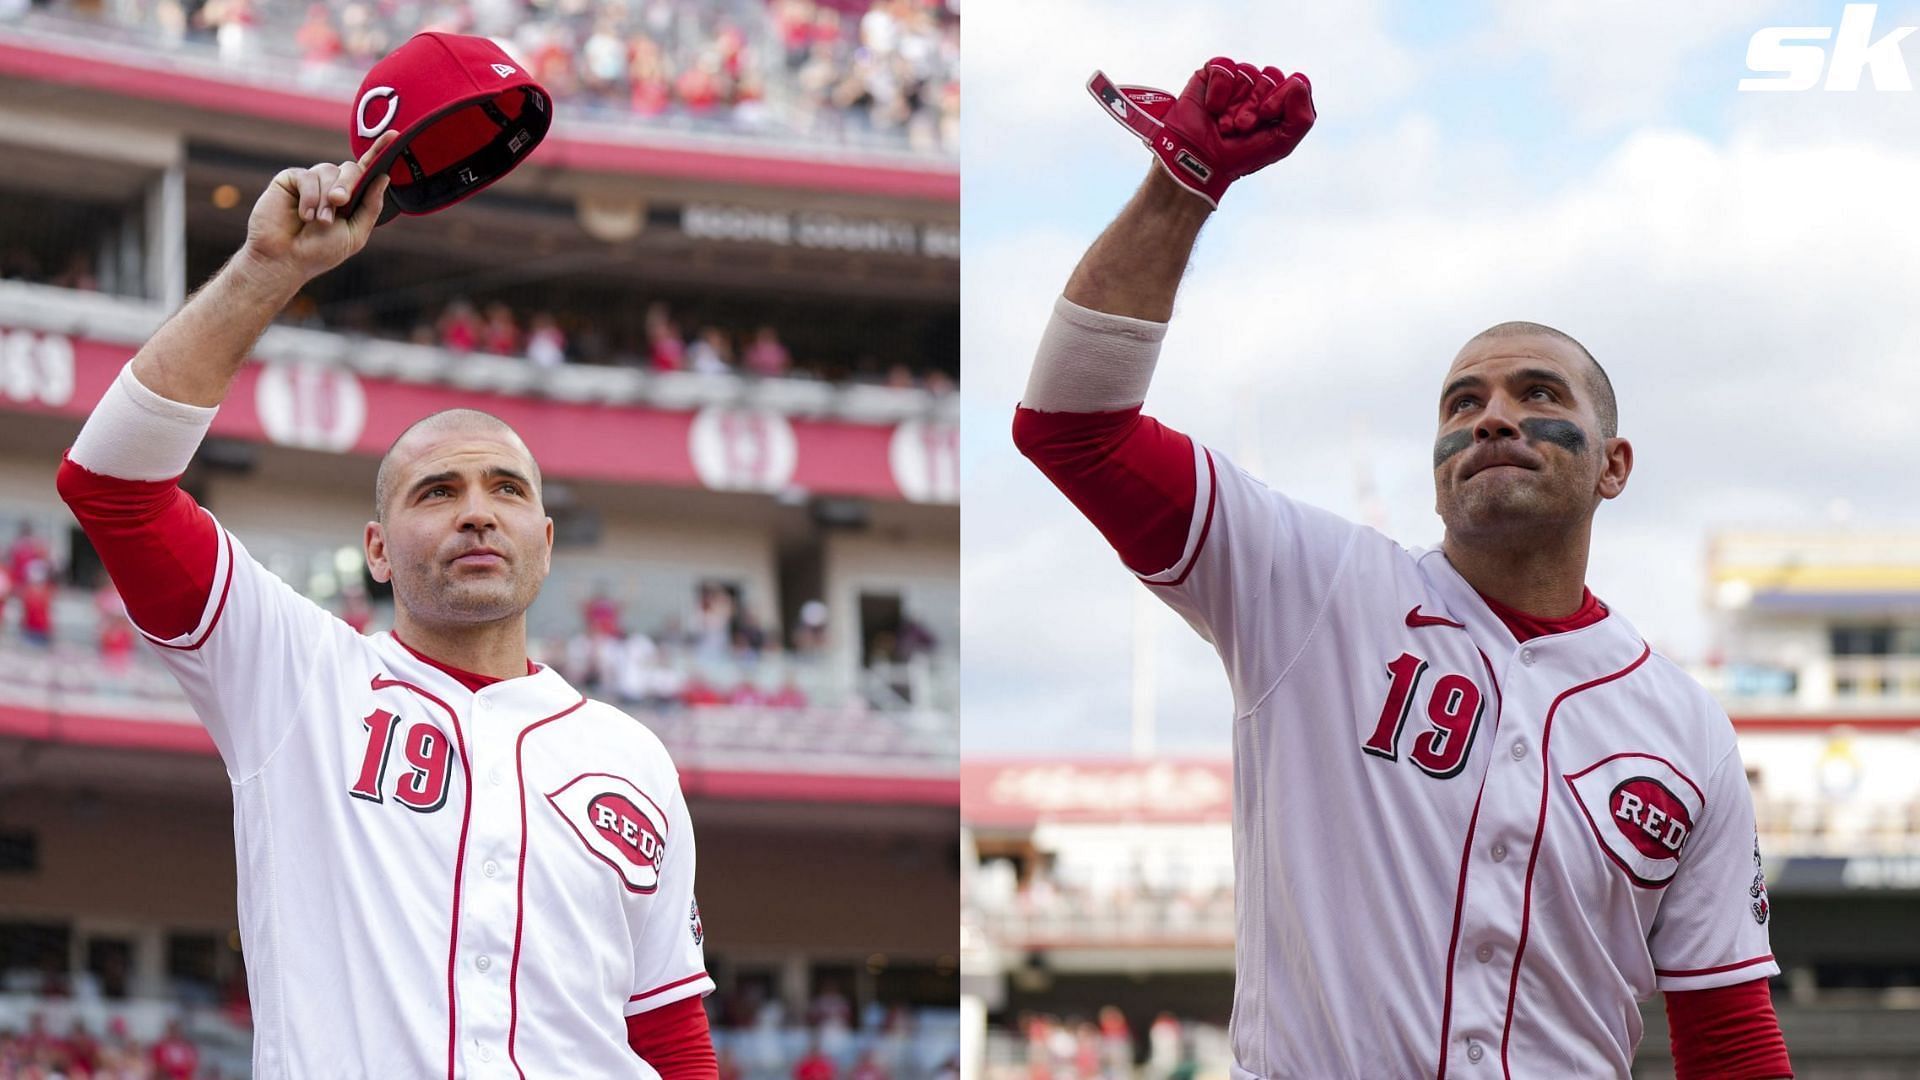 Cincinnati fans shower love on Joey Votto after Reds icons